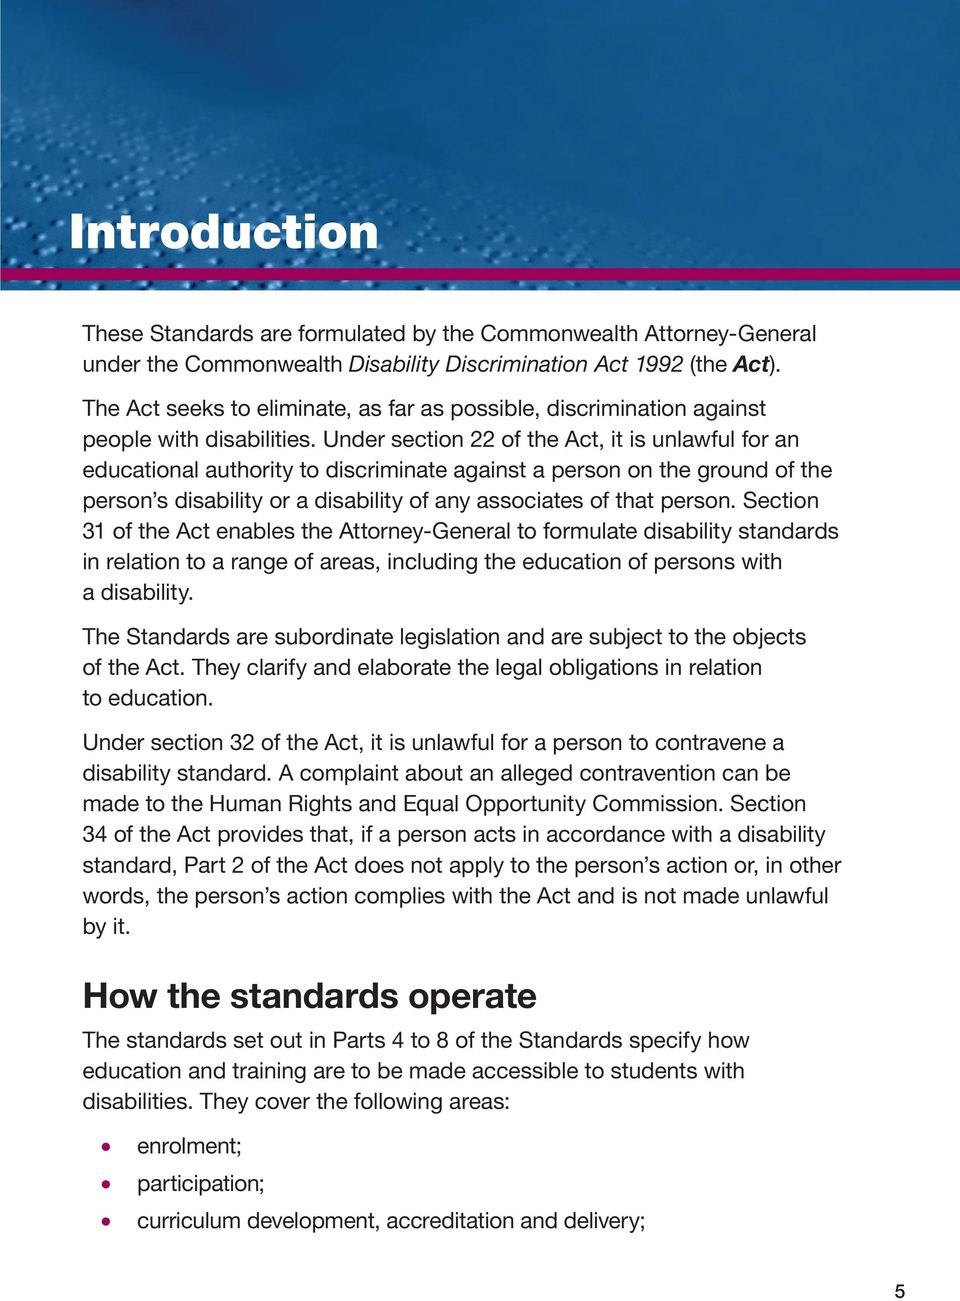 Under section 22 of the Act, it is unlawful for an educational authority to discriminate against a person on the ground of the person s disability or a disability of any associates of that person.